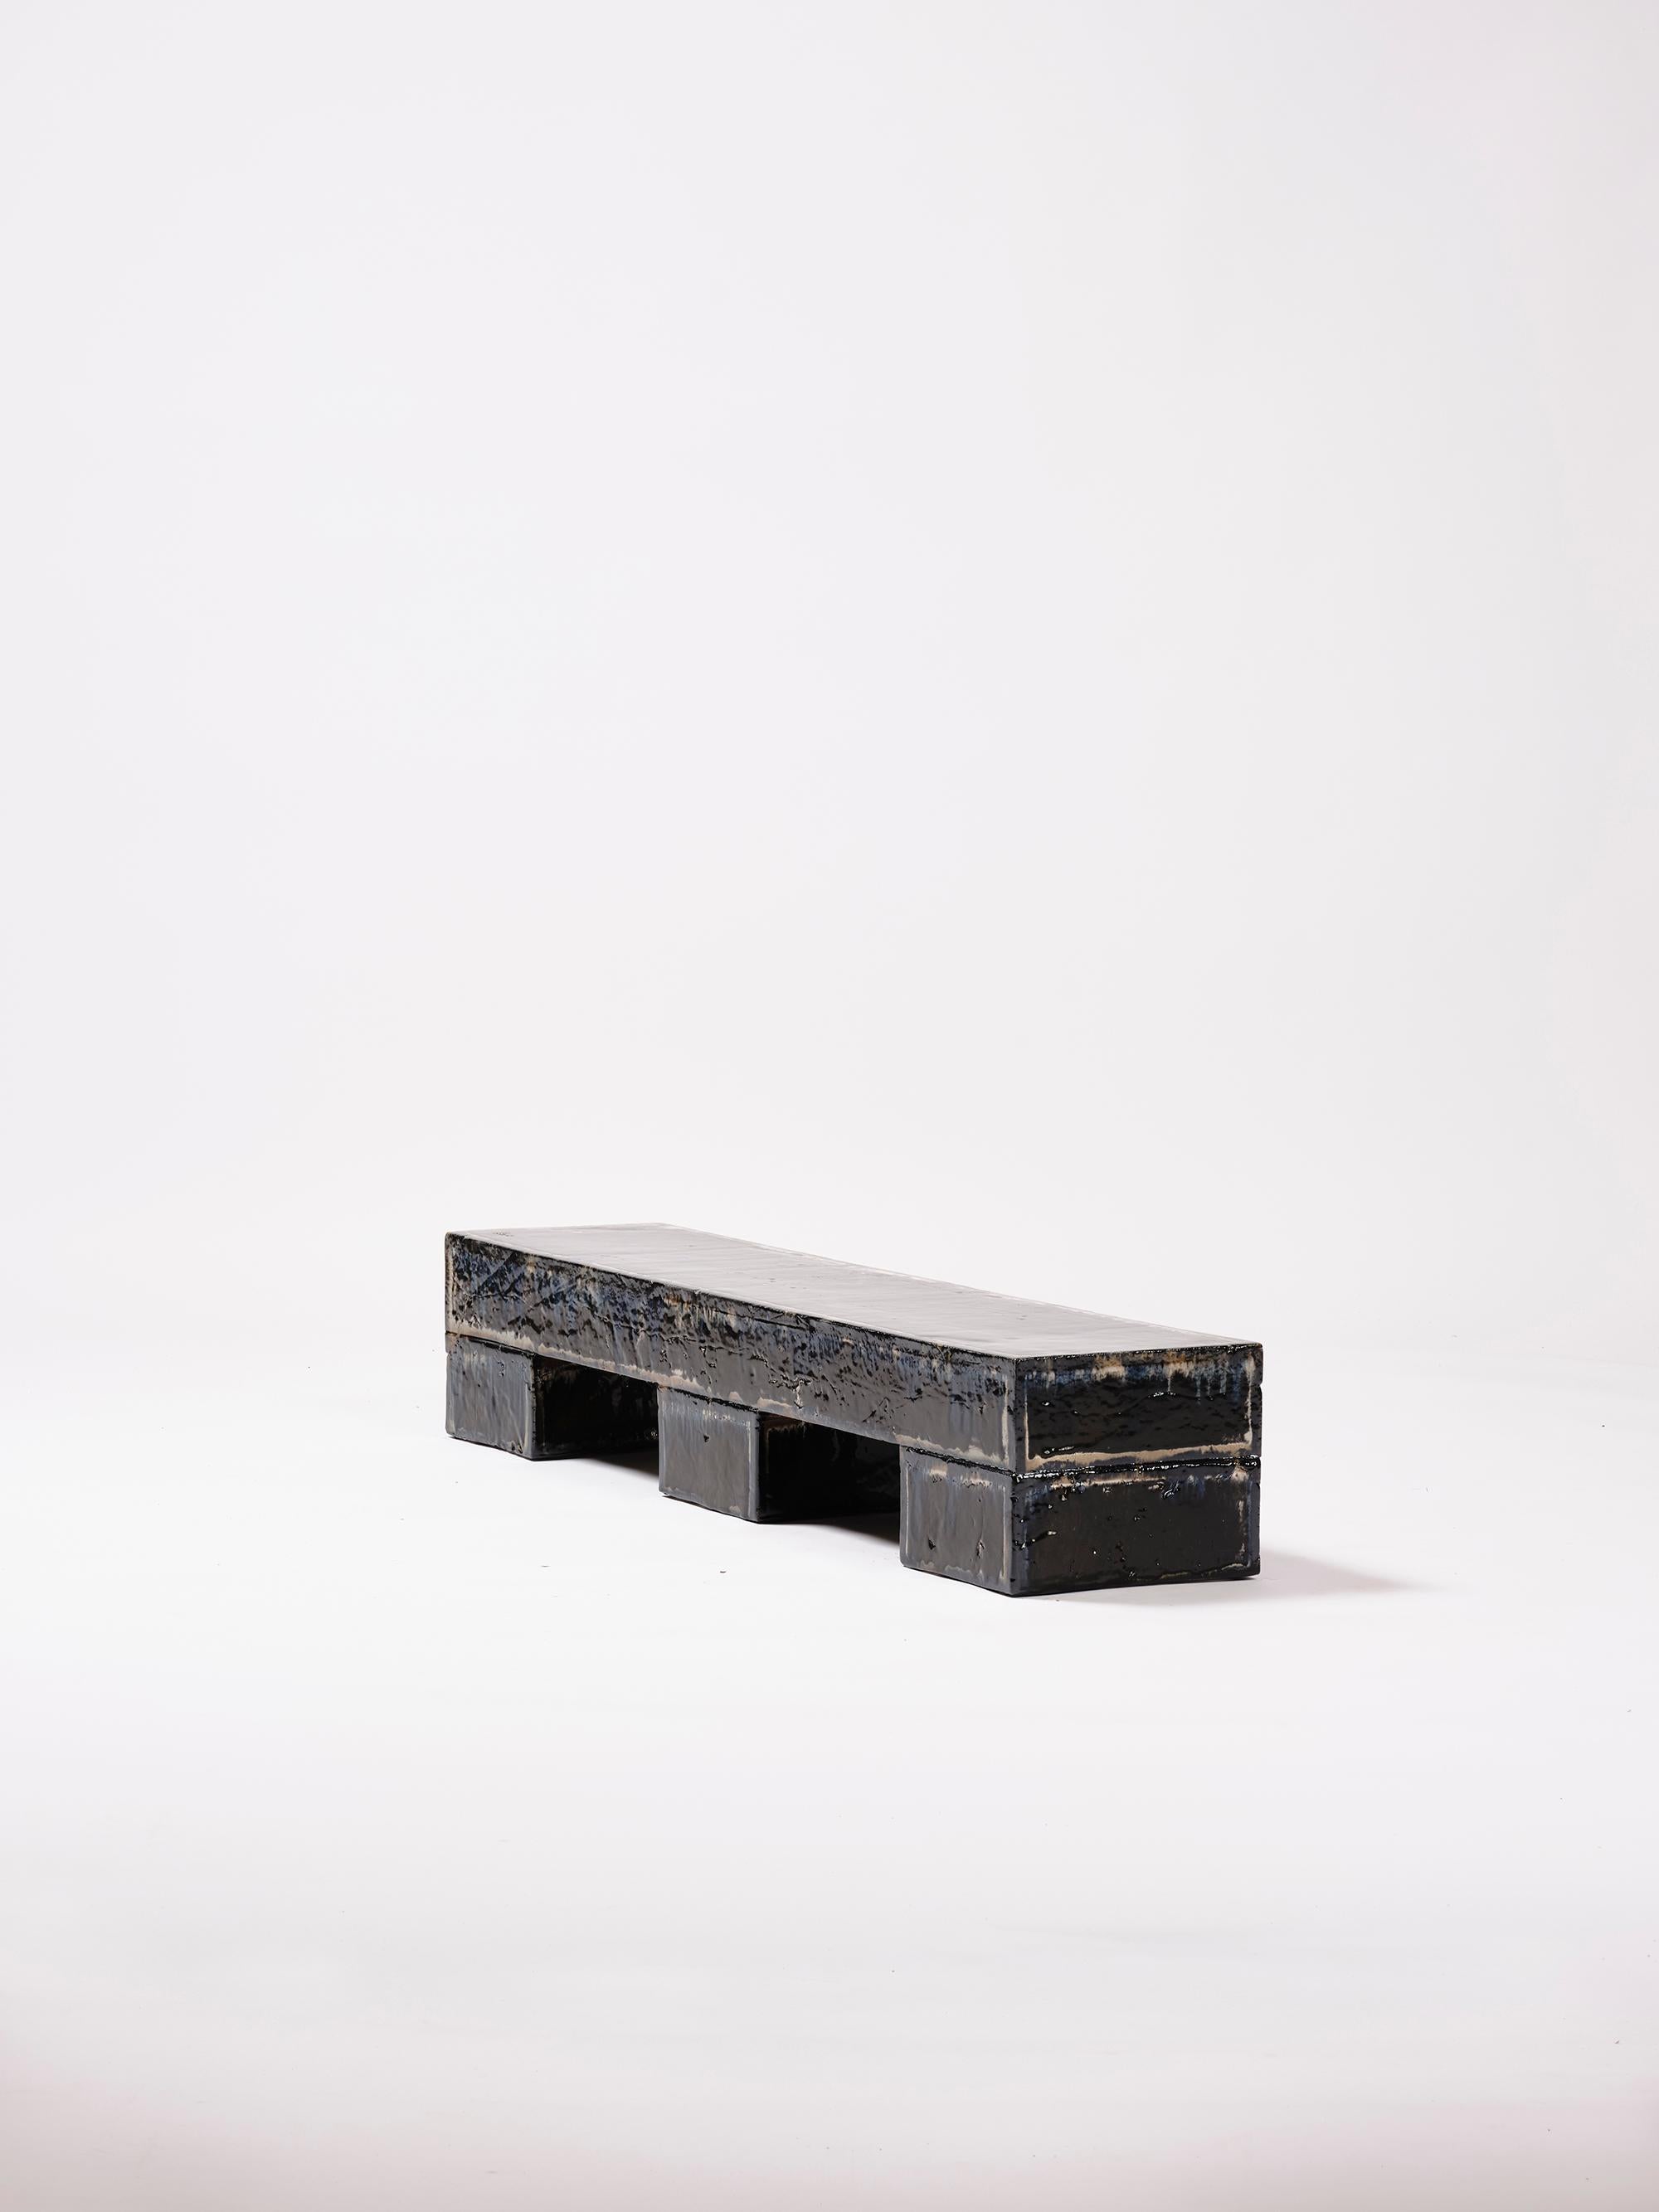 Contemporary Ceramic modern Coffeetable Bench Glazed Stoneware Black Blue In New Condition For Sale In Rubi, Catalunya